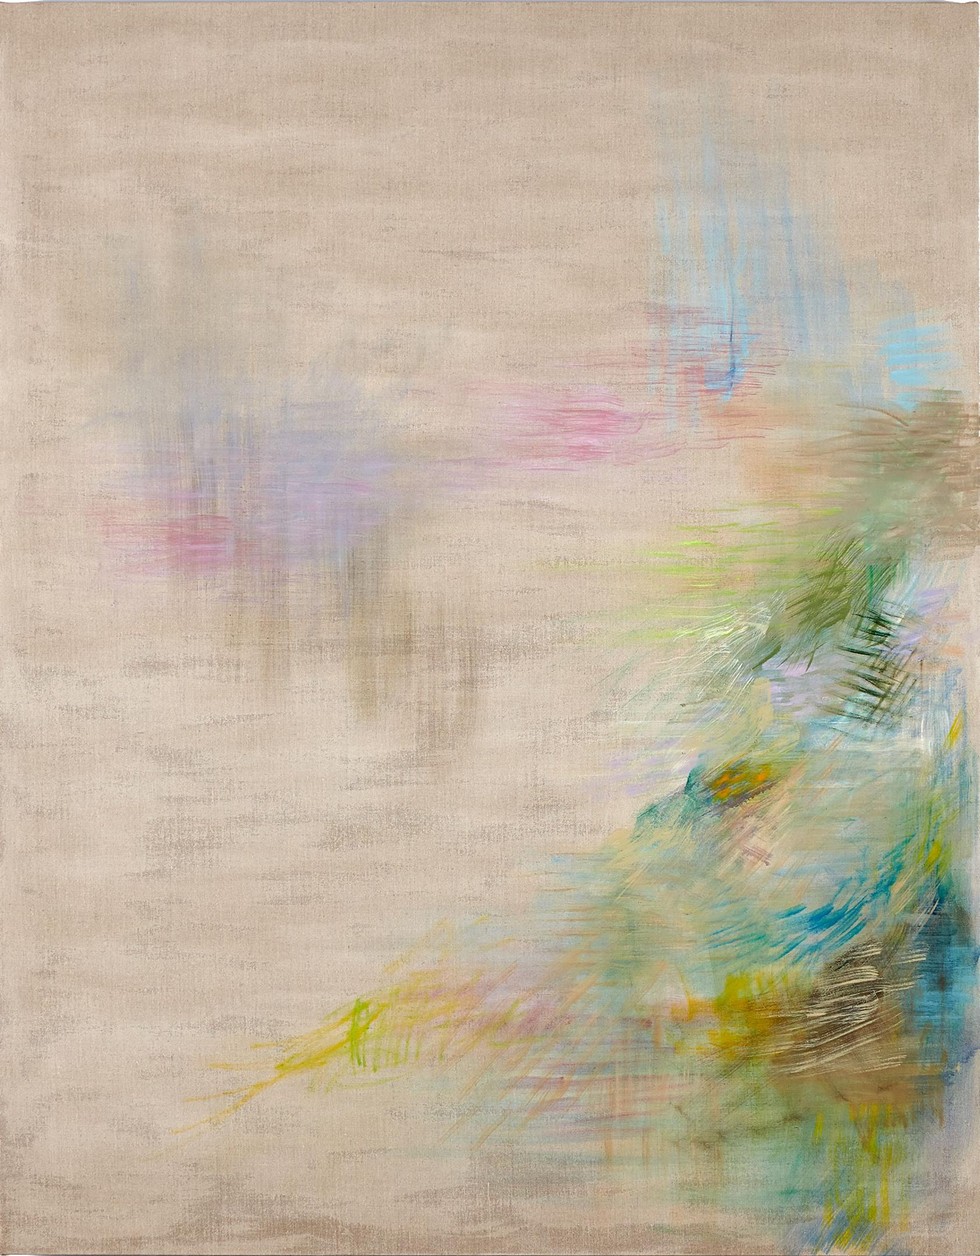 "Basement Painting No. 2," Russell Steinert, oil on PVA ground with white pigment on linen, 70 x 55 inches